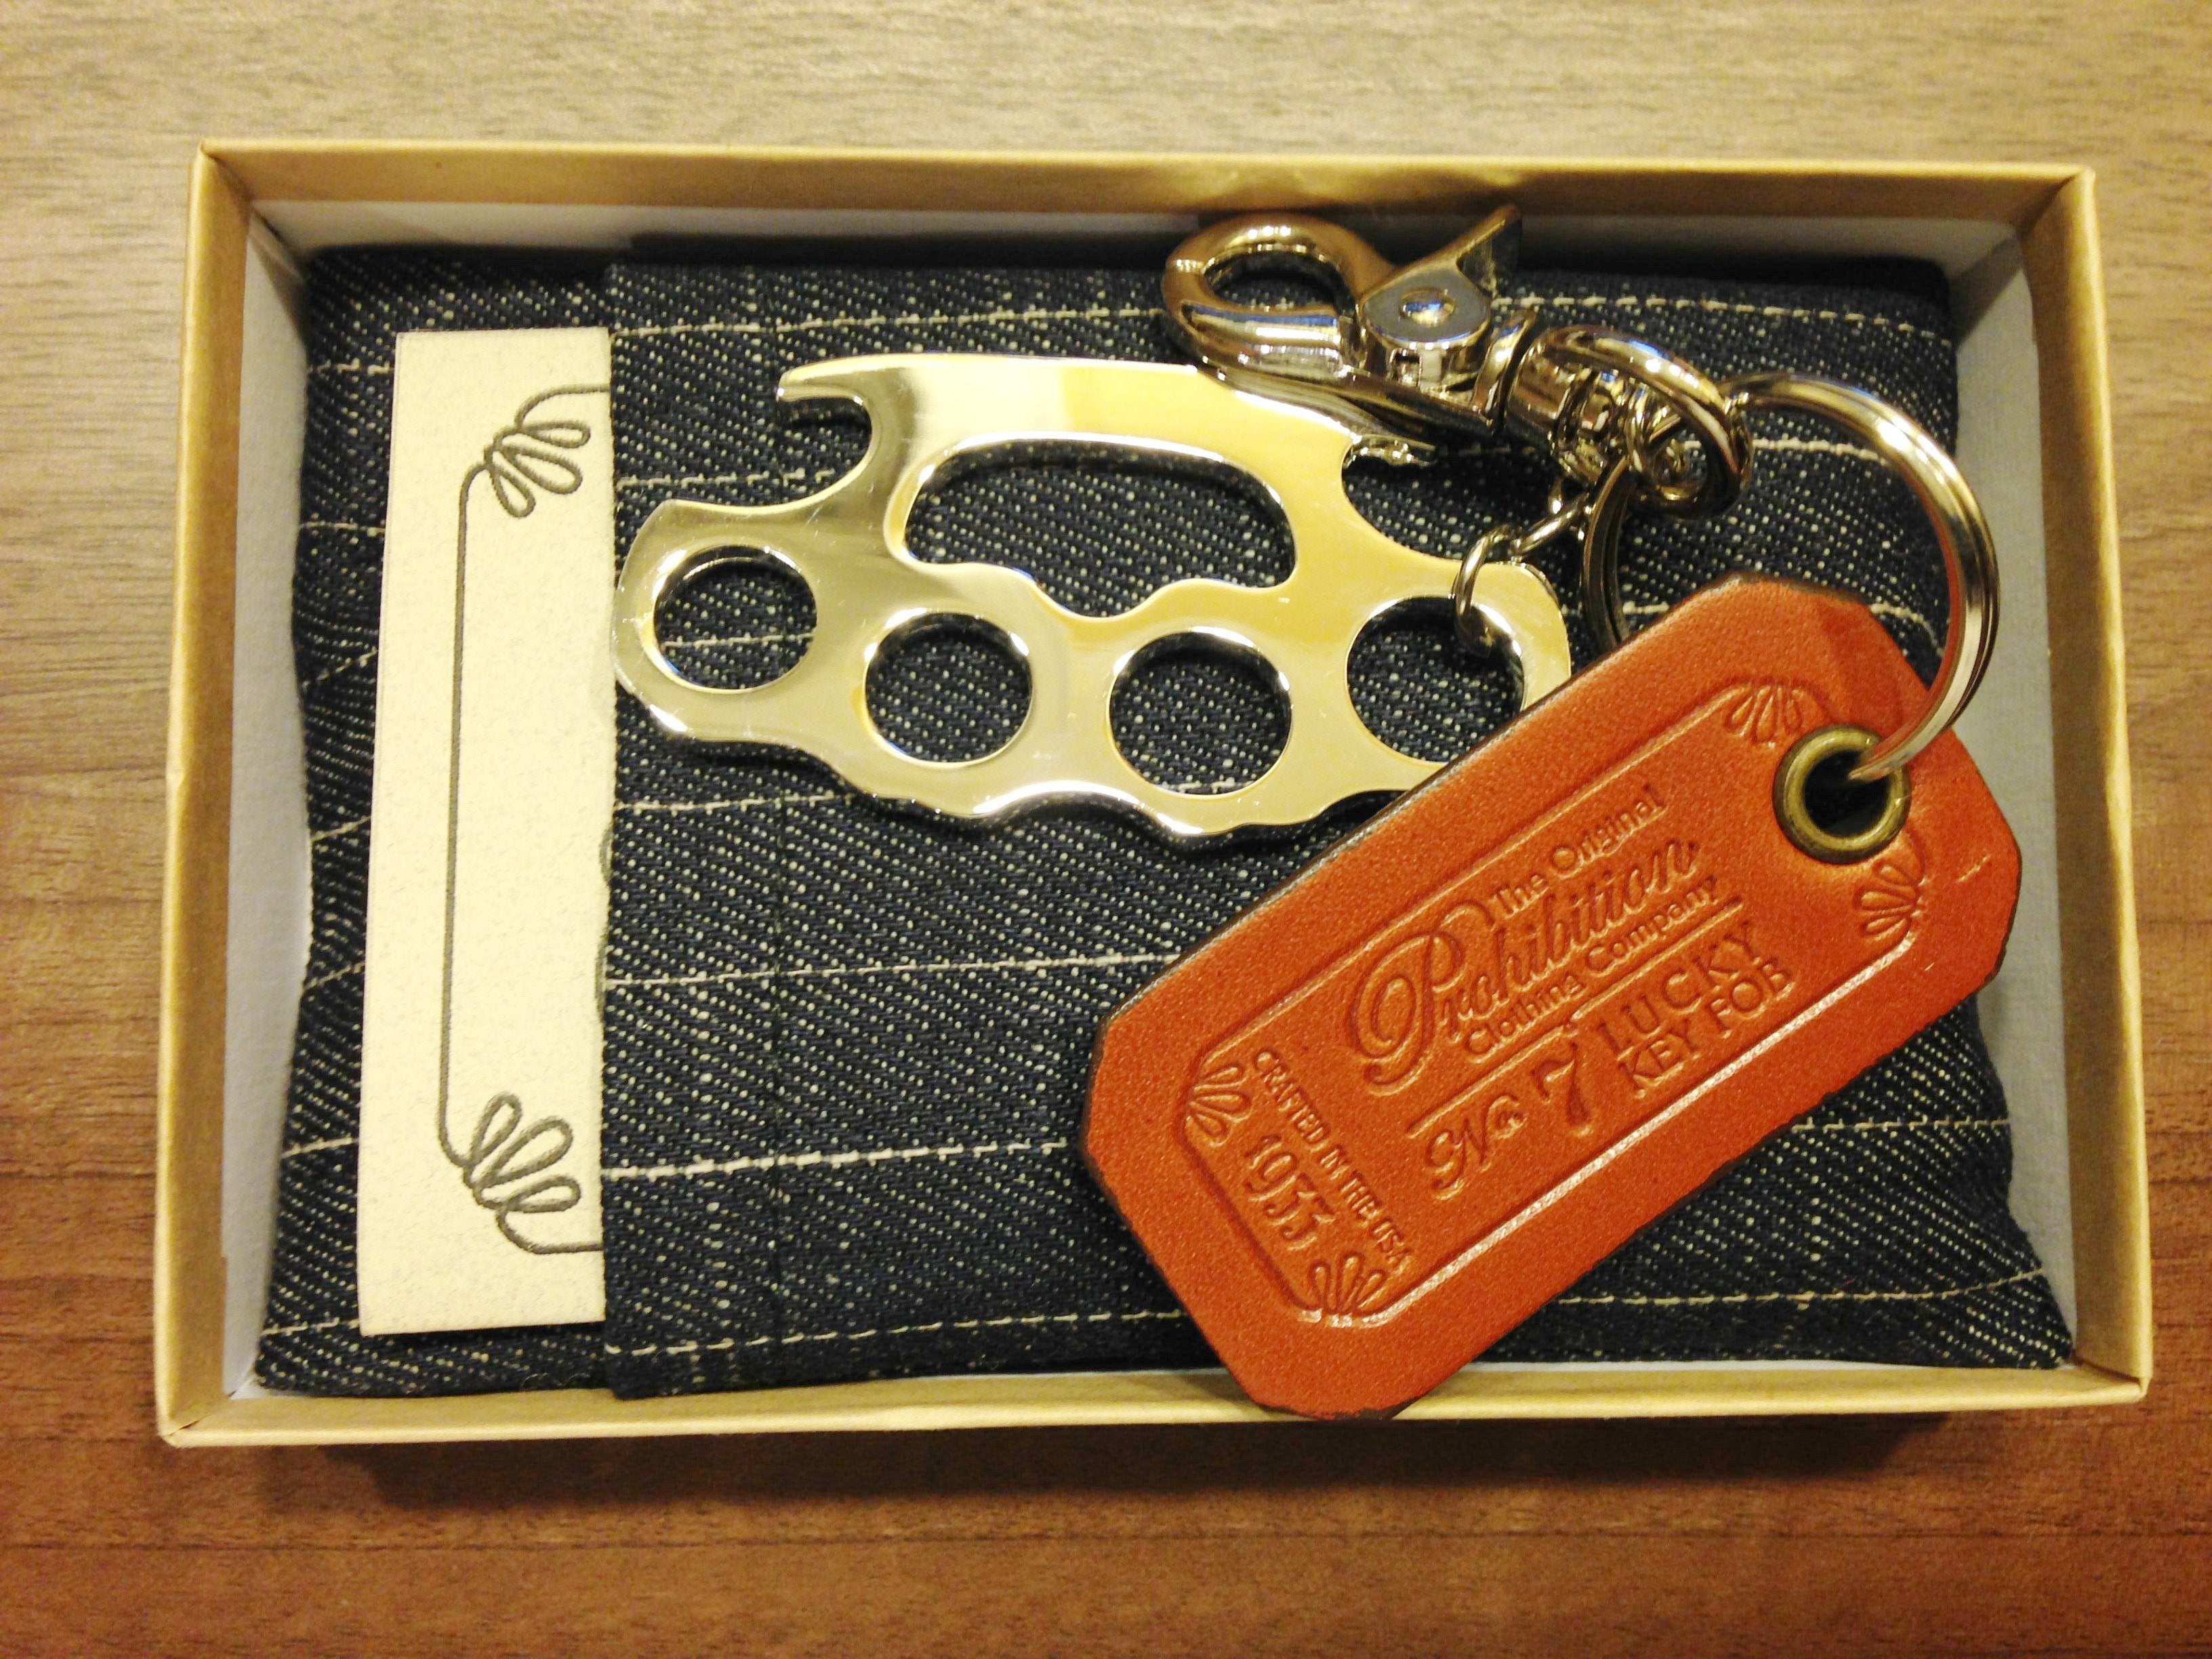 No.7 Key Chain "The Chicago Way" with Brass Knuckles Bottle Opener